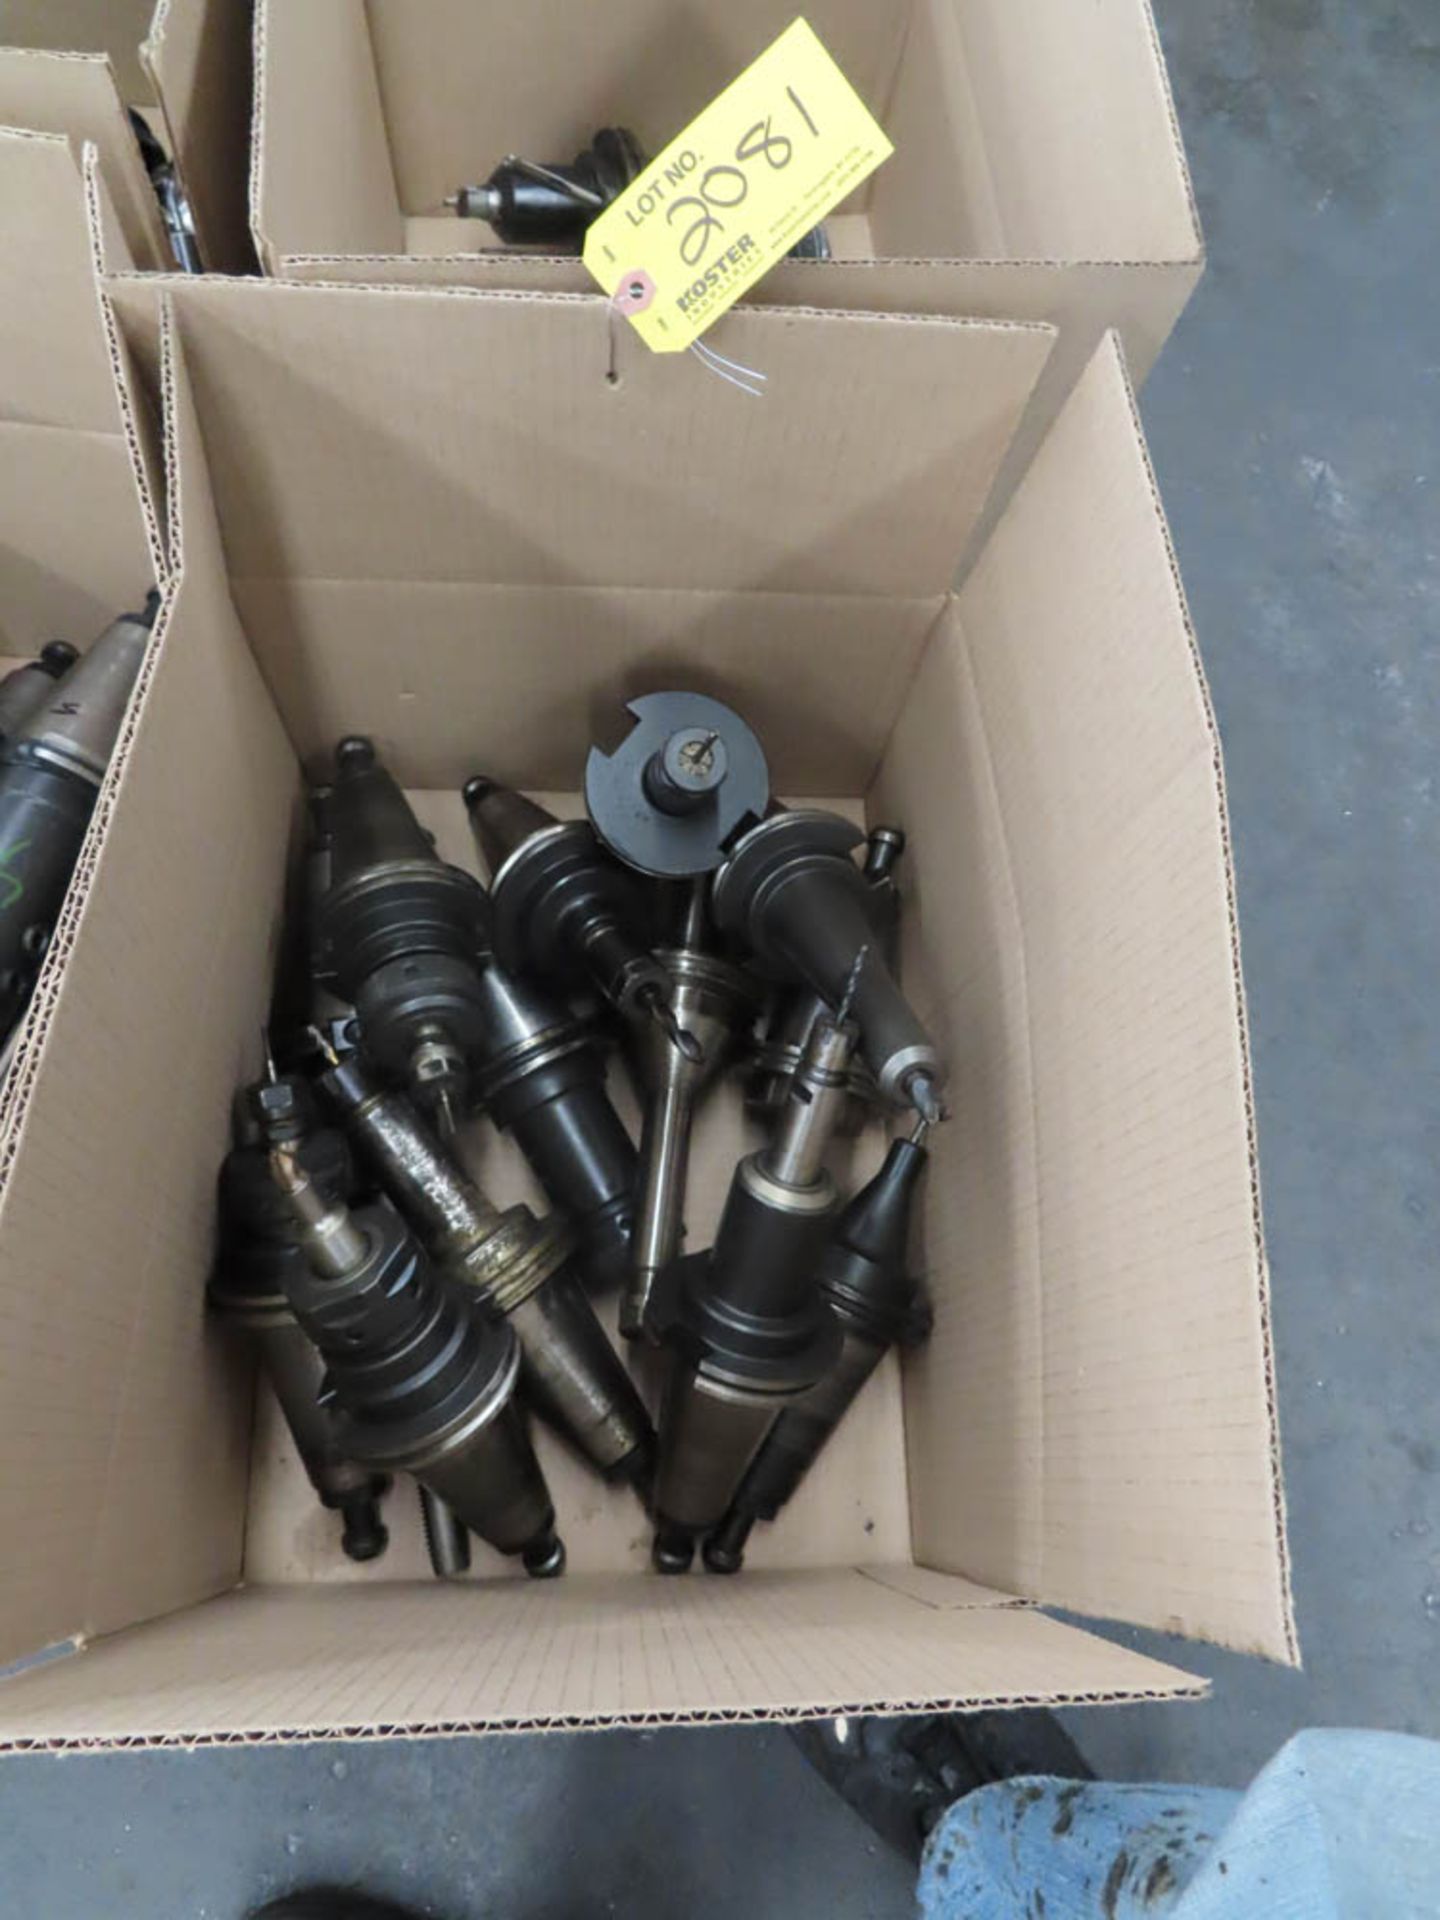 LOT OF ASSORTED CAT 50T TOOL HOLDERS